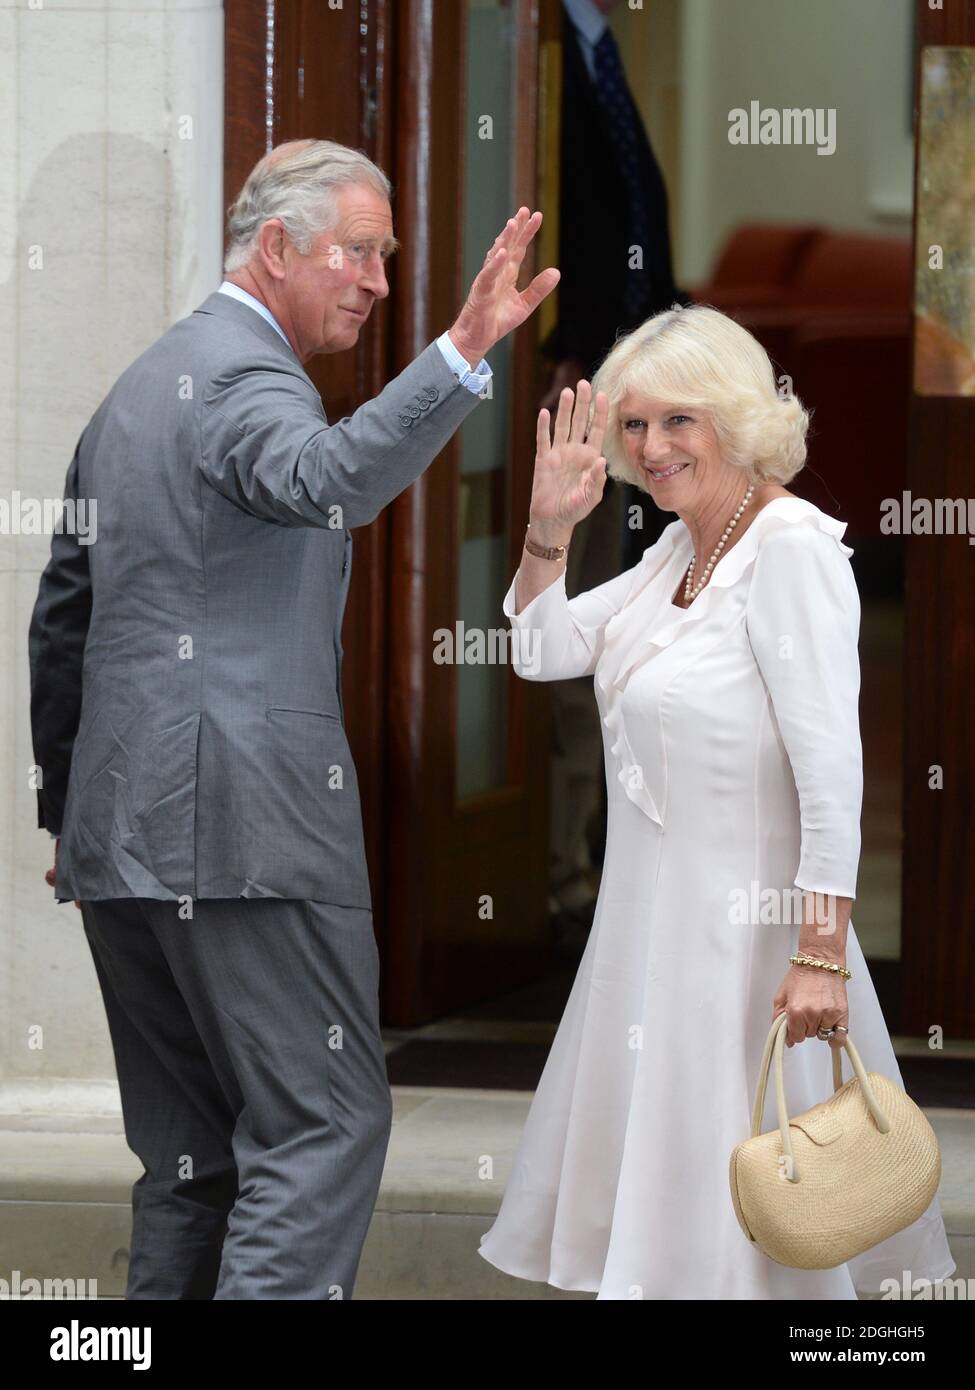 Prince Charles and The Duchess of Cornwall visiting Prince William and Kate Middleton, The Duke and Duchess of Cambridge at the Lindo Wing of St Mary's Hospital with their new born baby boy, Paddington, London. Stock Photo